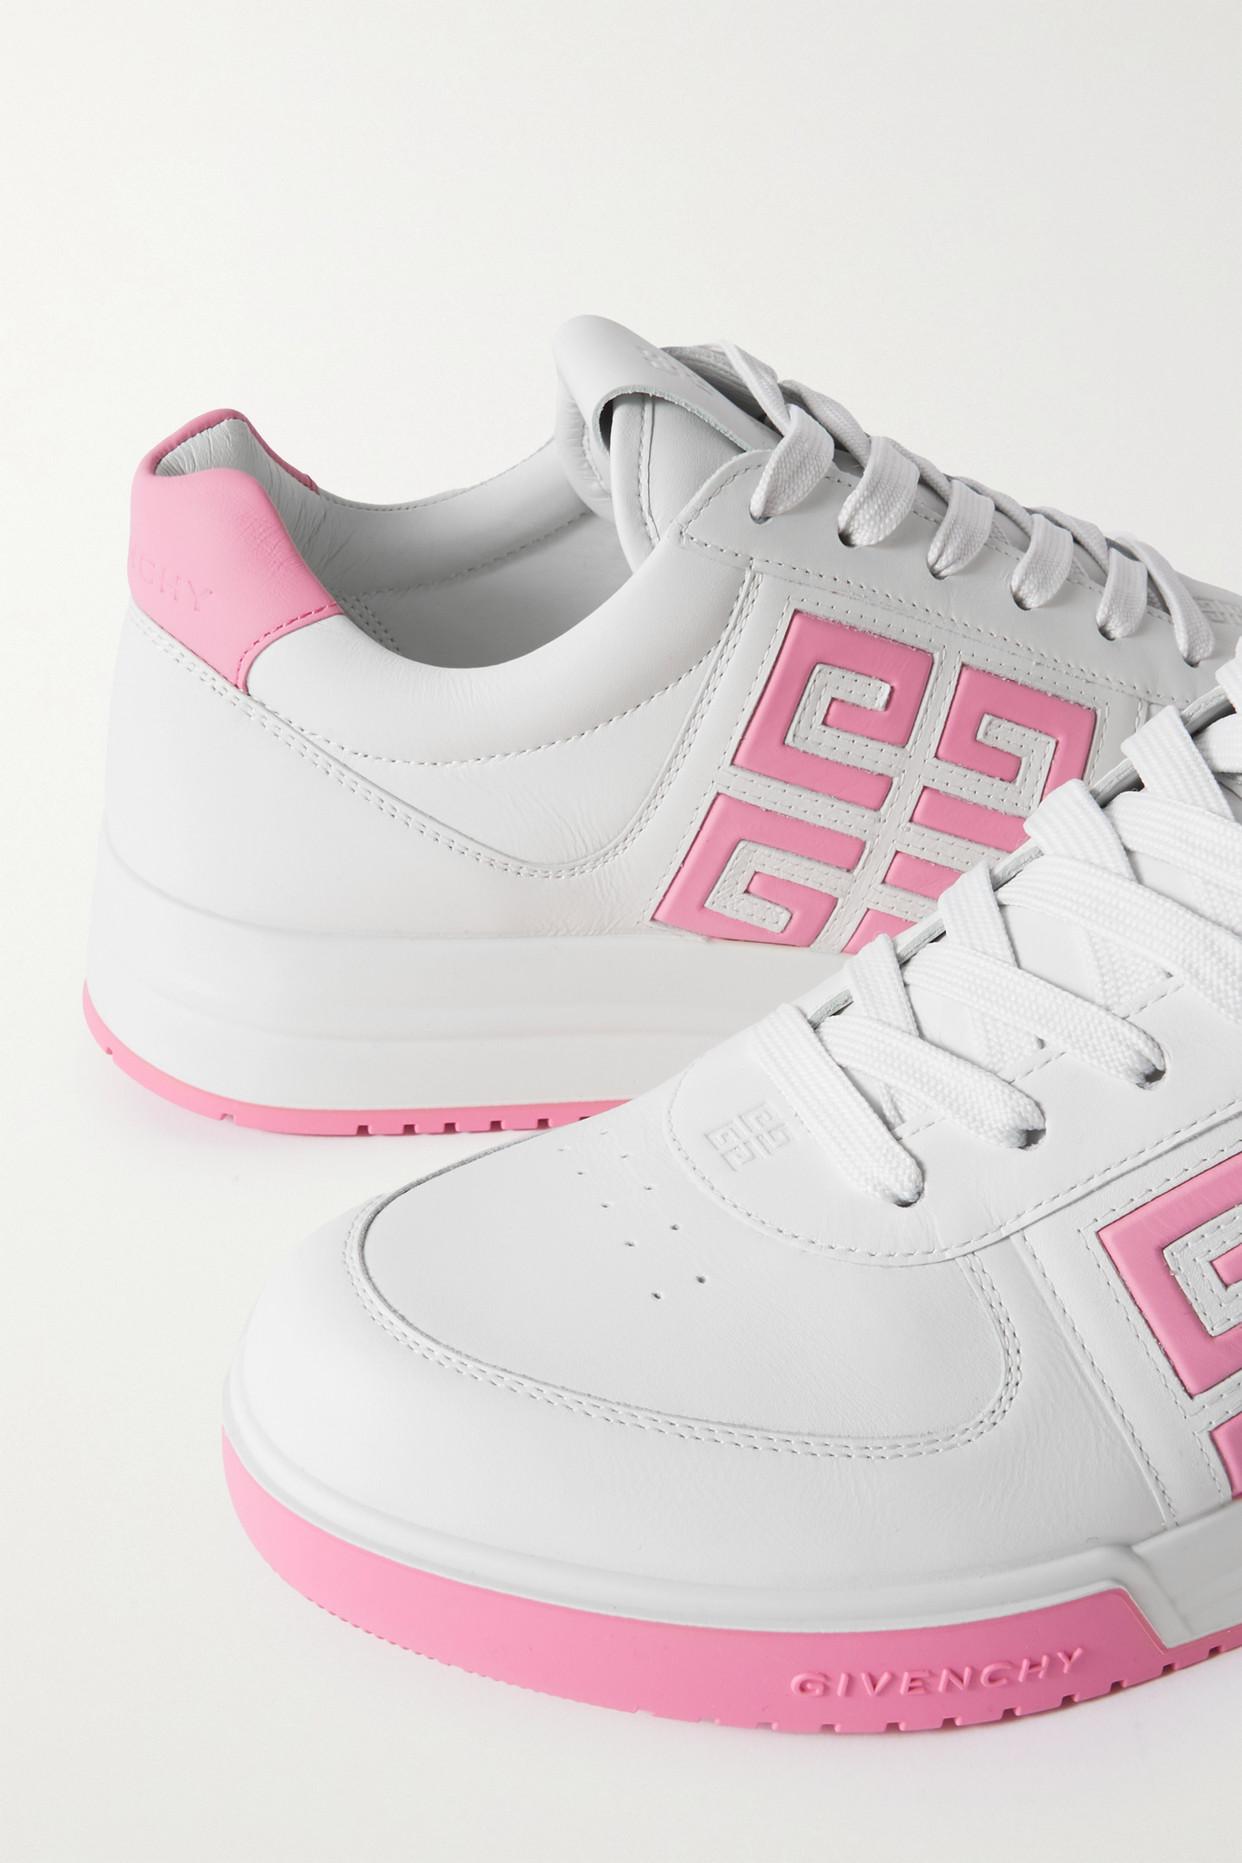 Givenchy G4 Logo-embossed Leather Sneakers in Pink | Lyst